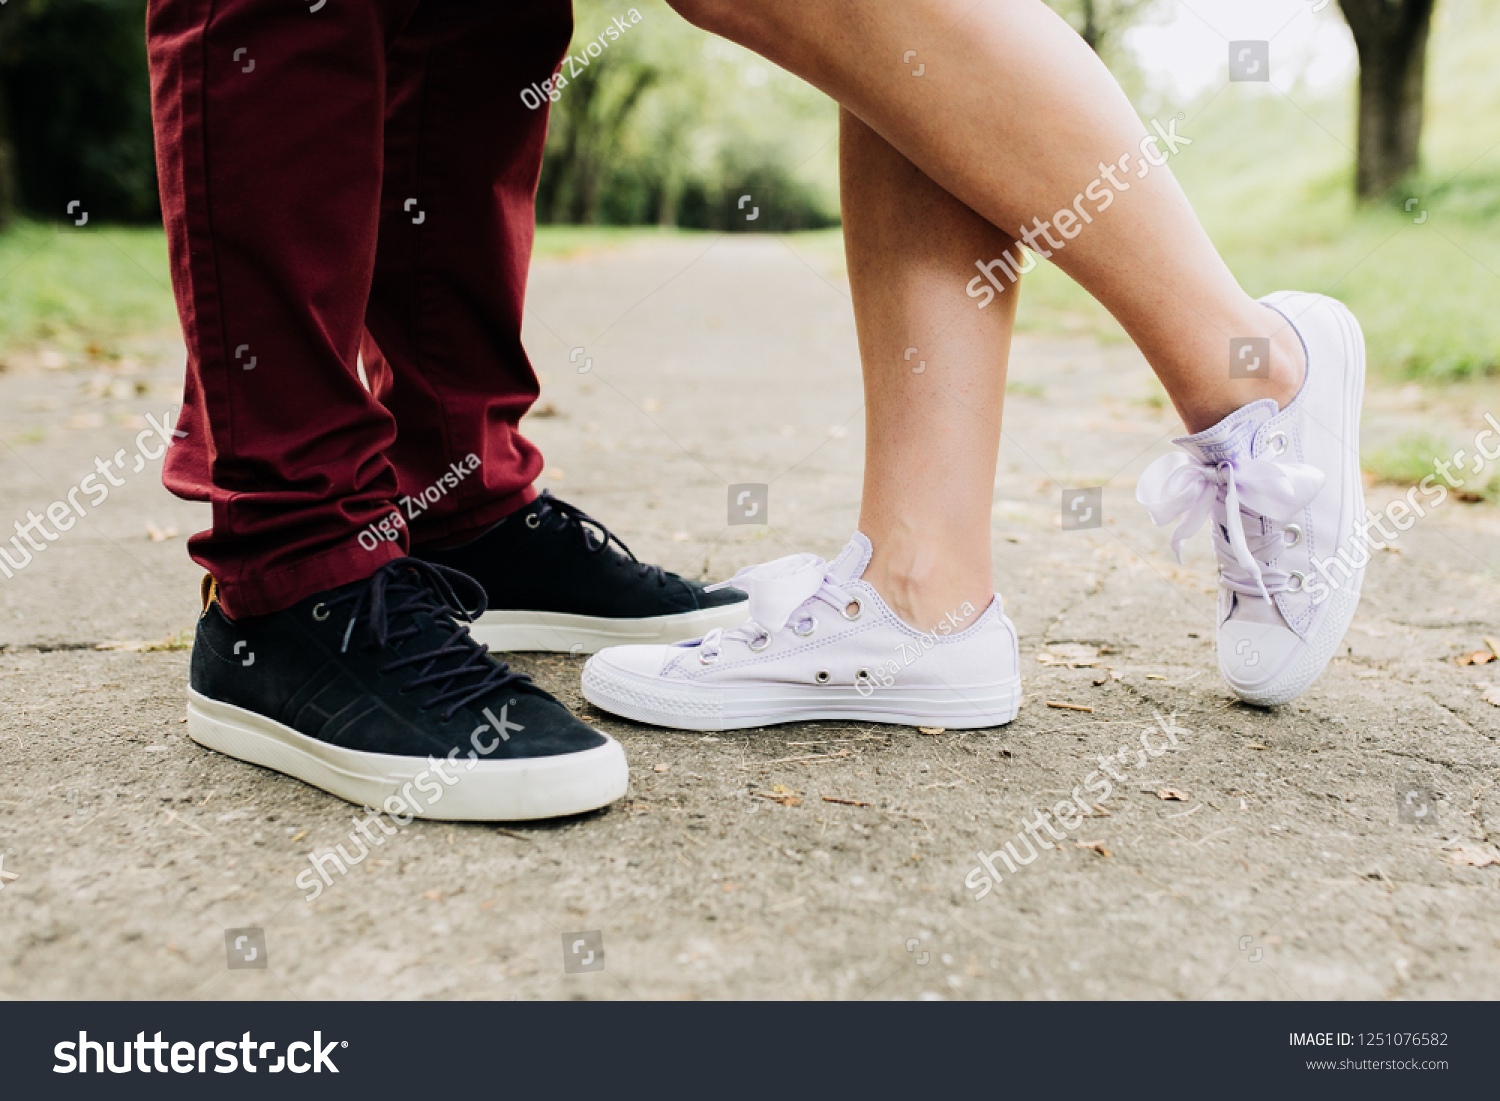 groom with sneakers